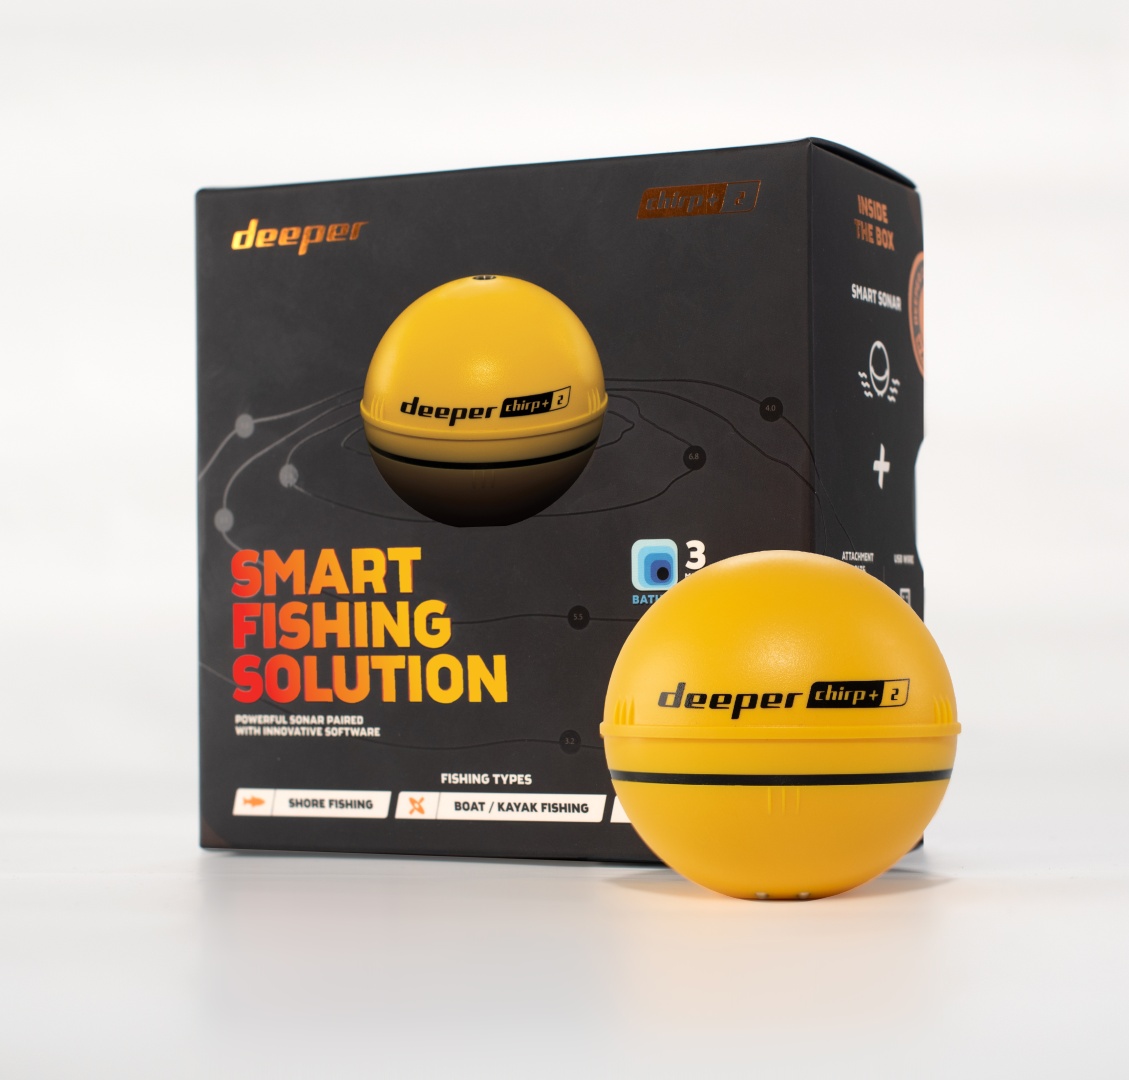 Deeper Sonar CHIRP+ 2 Yellow Limited Edition